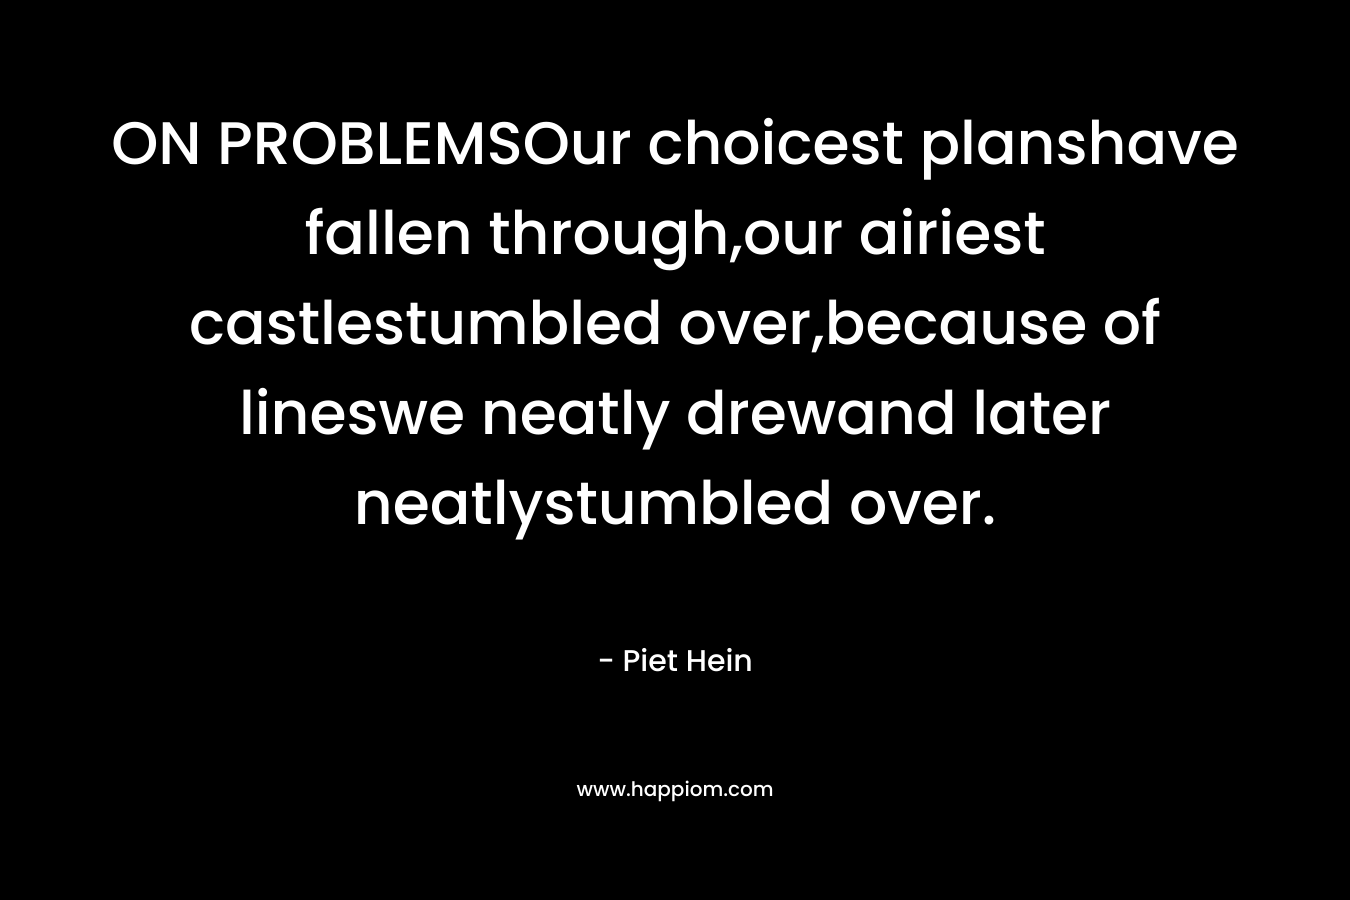 ON PROBLEMSOur choicest planshave fallen through,our airiest castlestumbled over,because of lineswe neatly drewand later neatlystumbled over. – Piet Hein